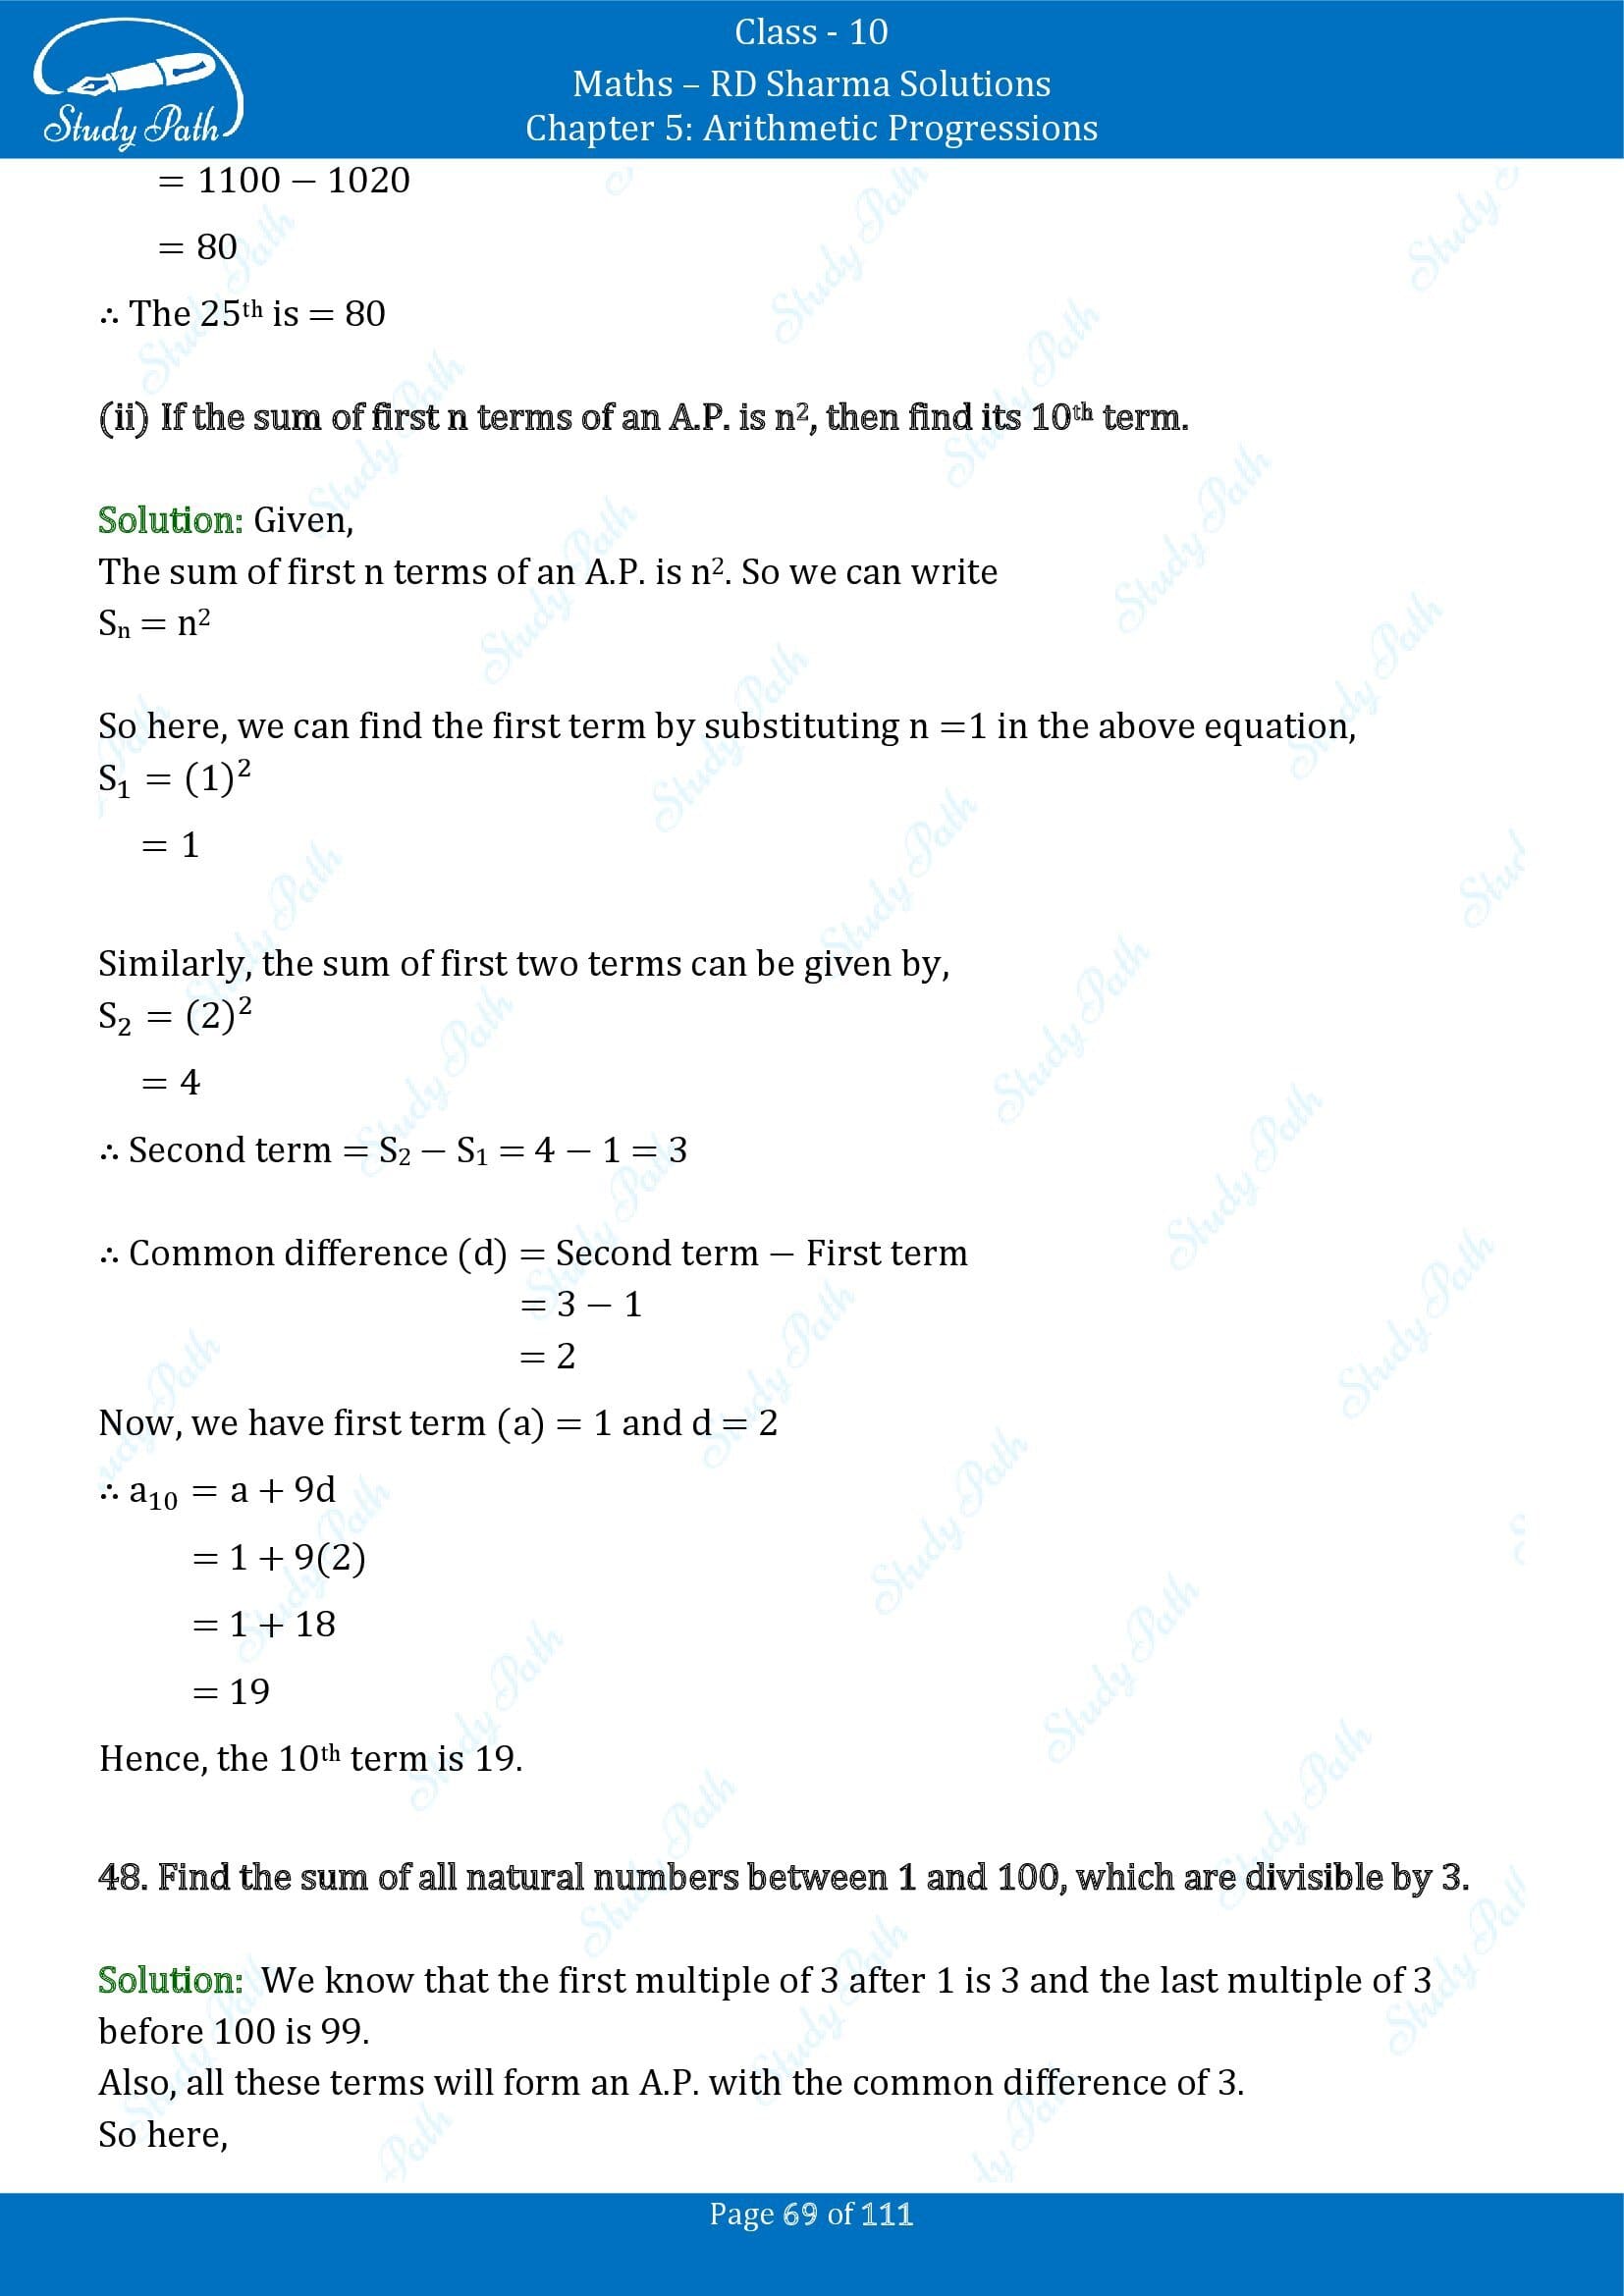 RD Sharma Solutions Class 10 Chapter 5 Arithmetic Progressions Exercise 5.6 00069